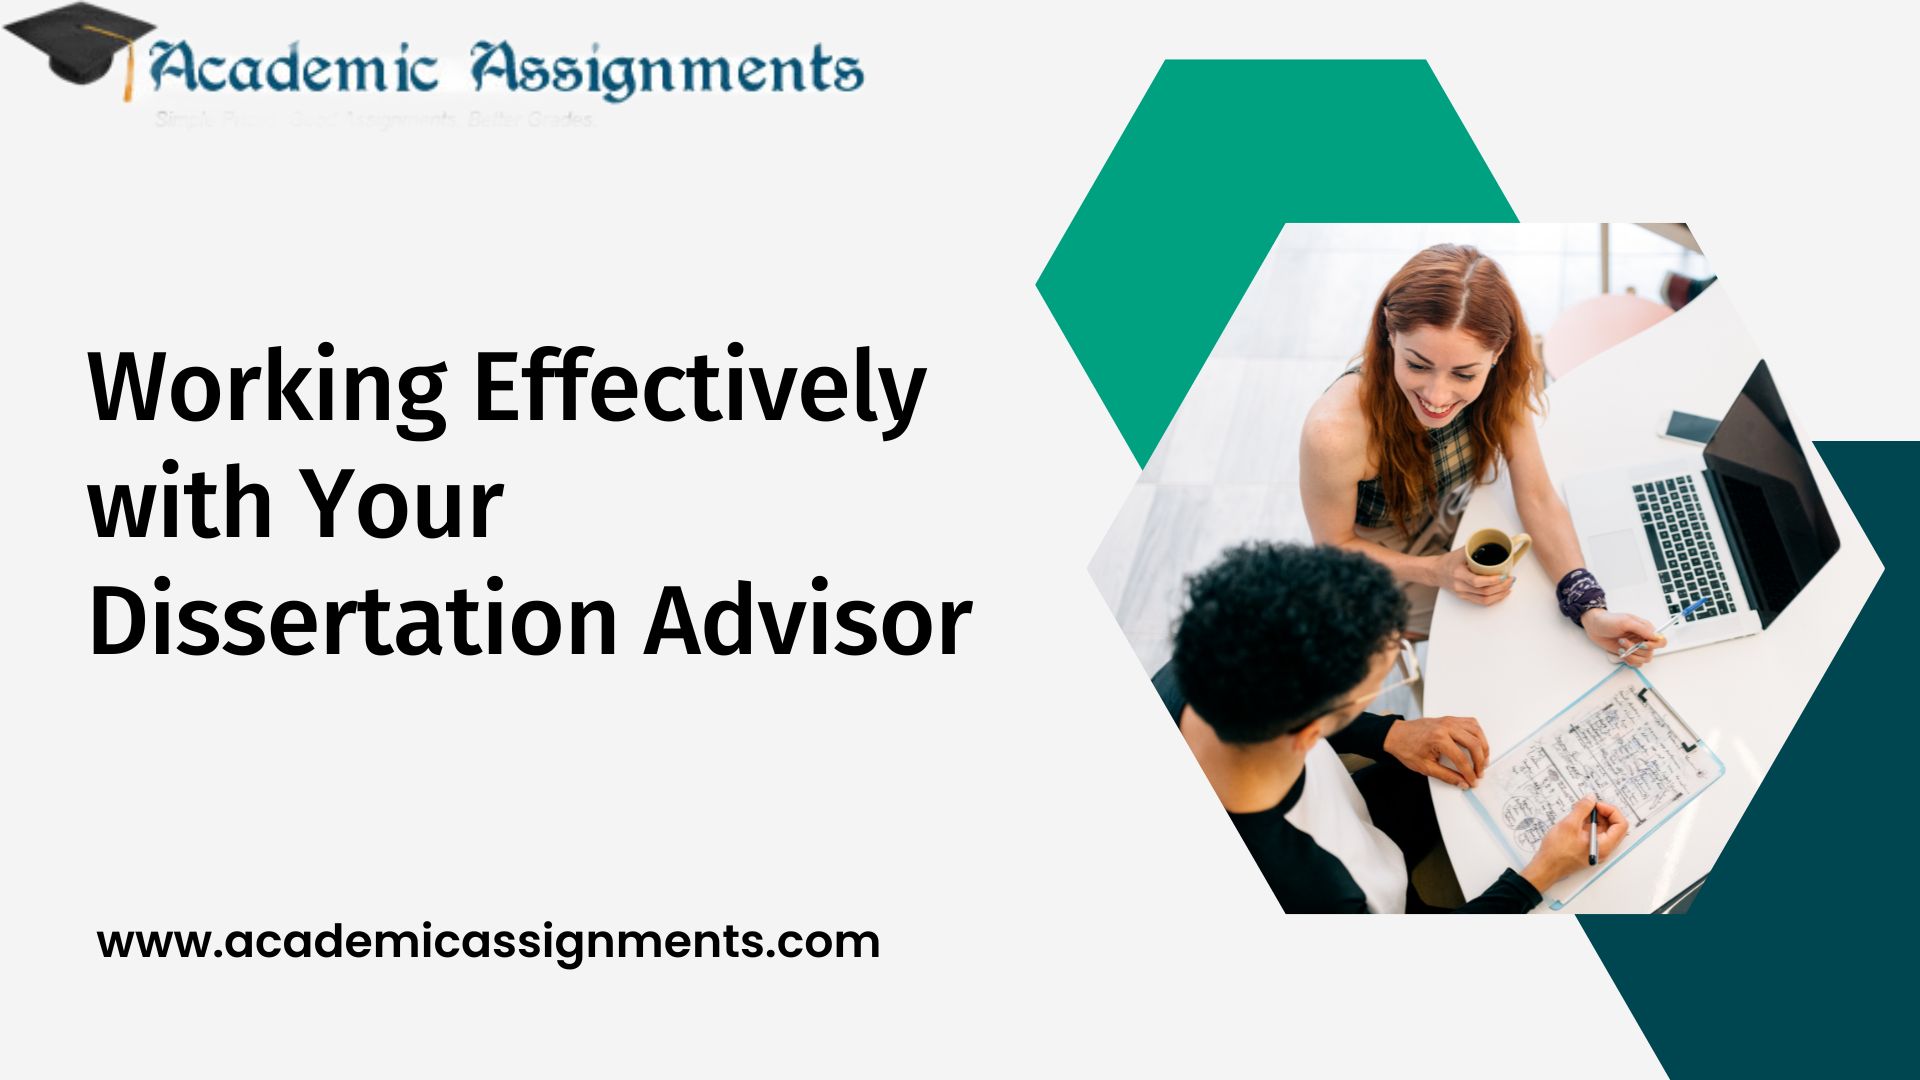 Working Effectively with Your Dissertation Advisor